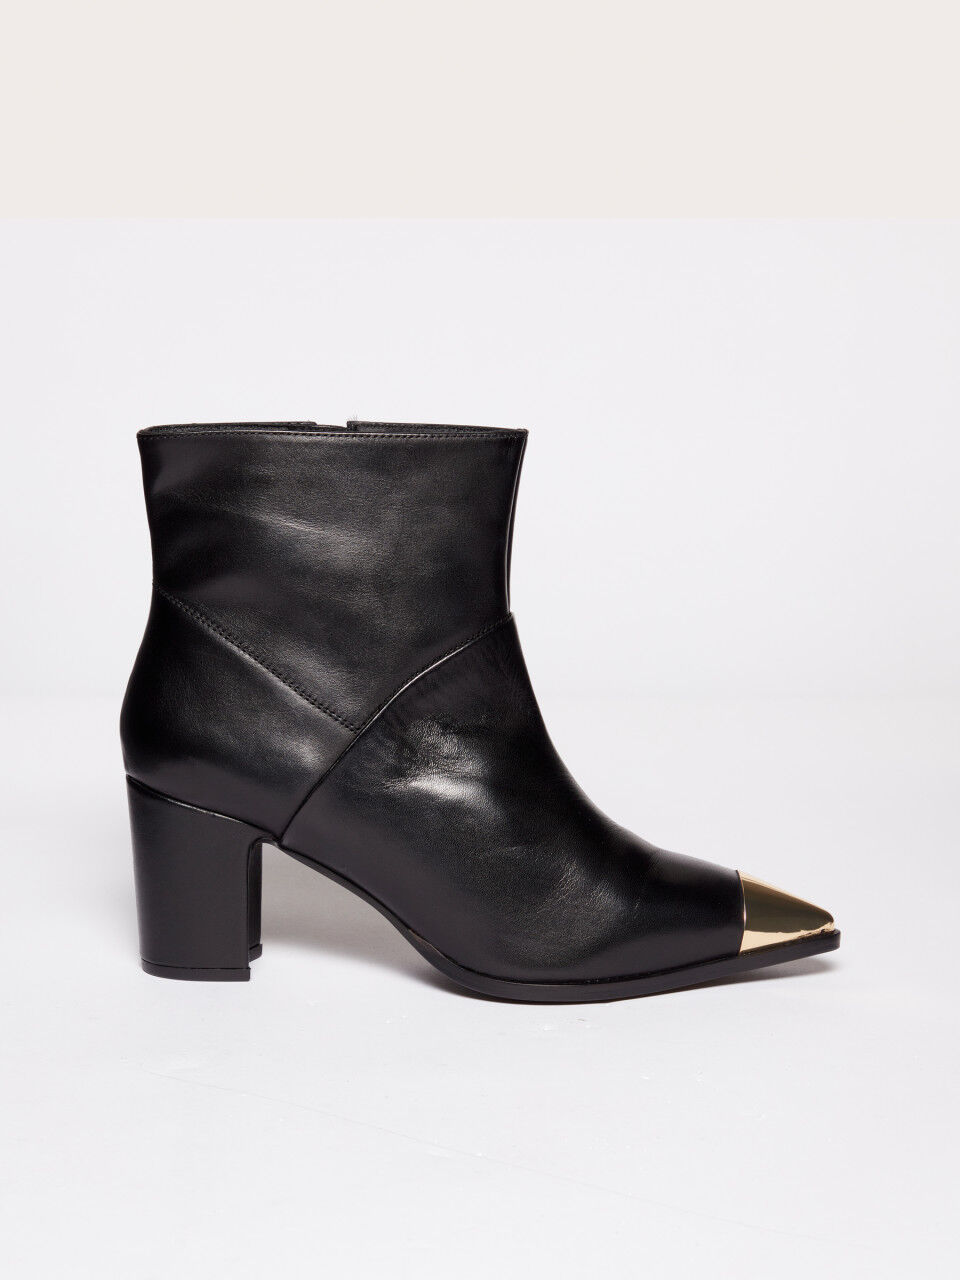 Ankle boots with gold details